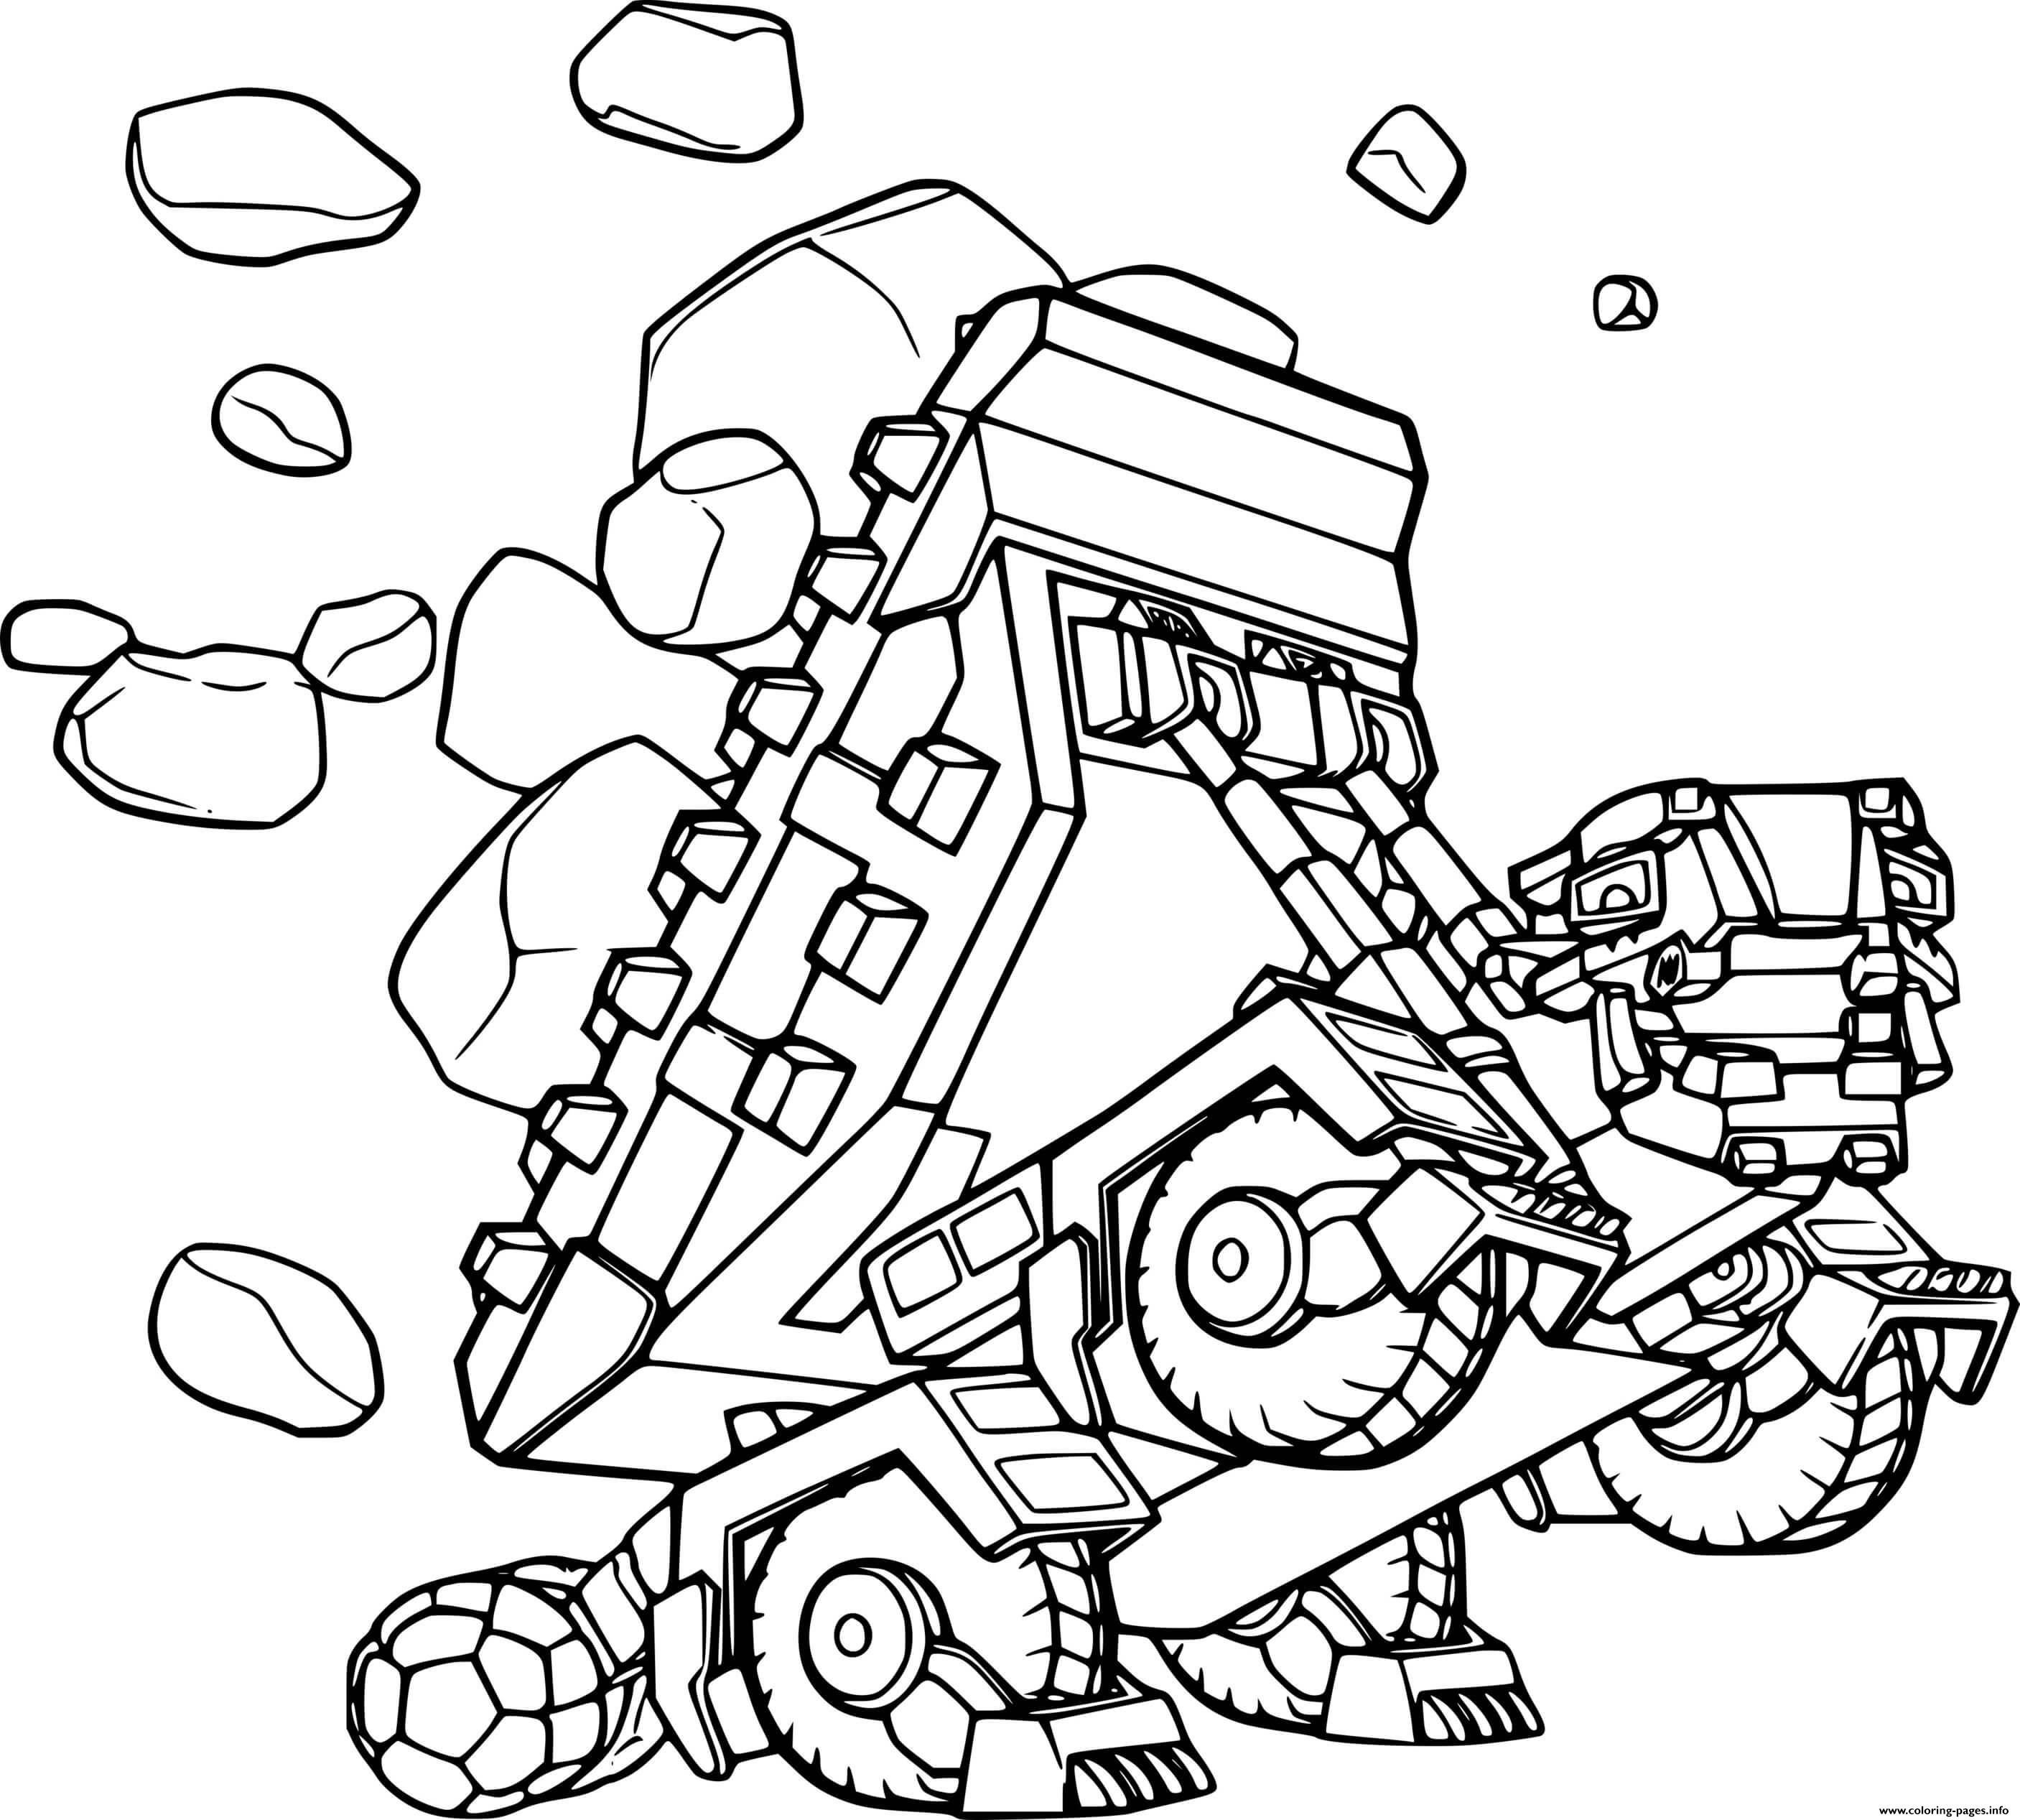 Ton Ton From Dinotrux coloring